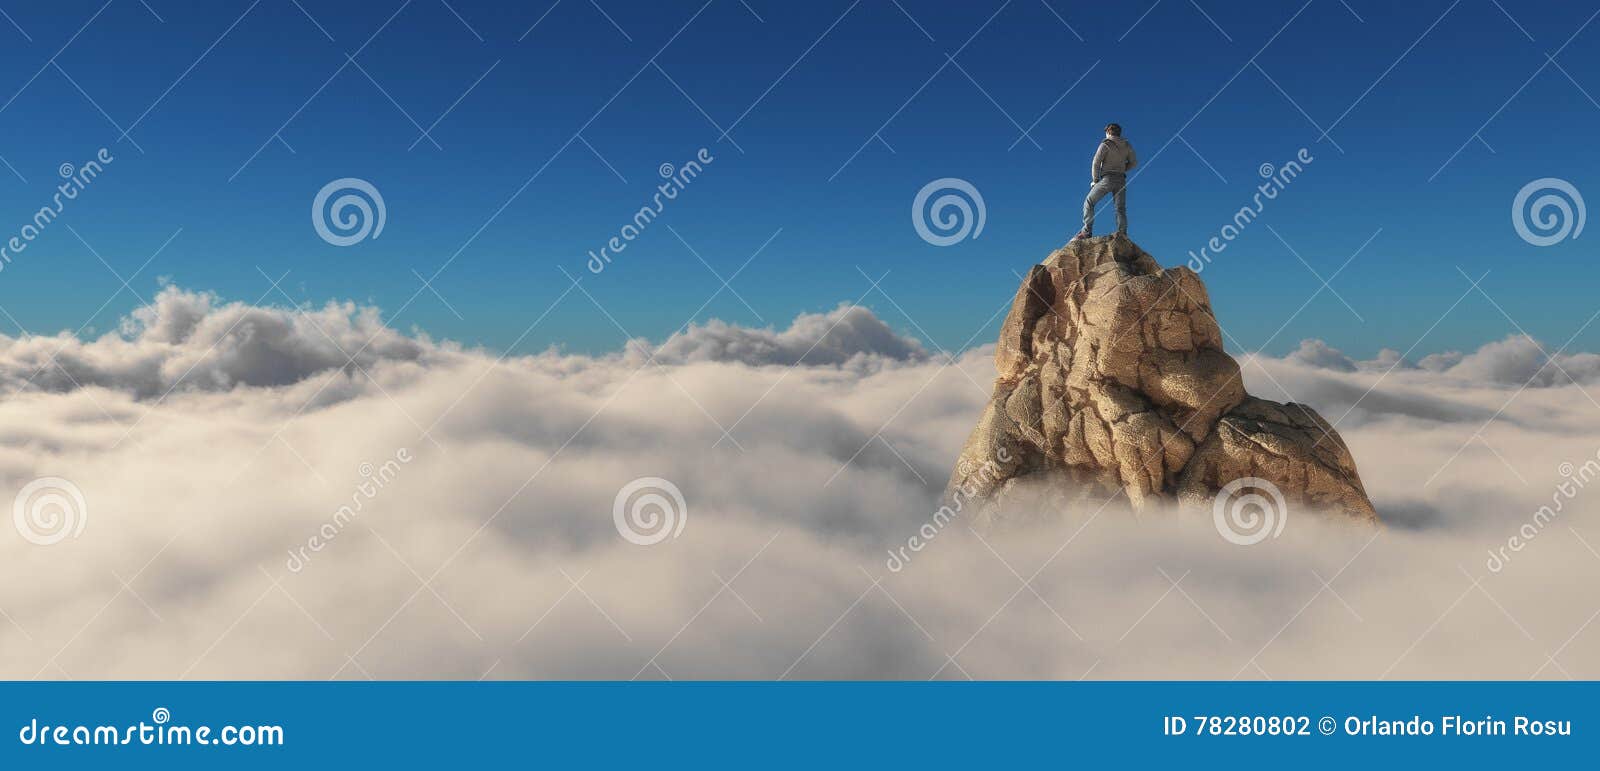 a man standing on a stone cliff